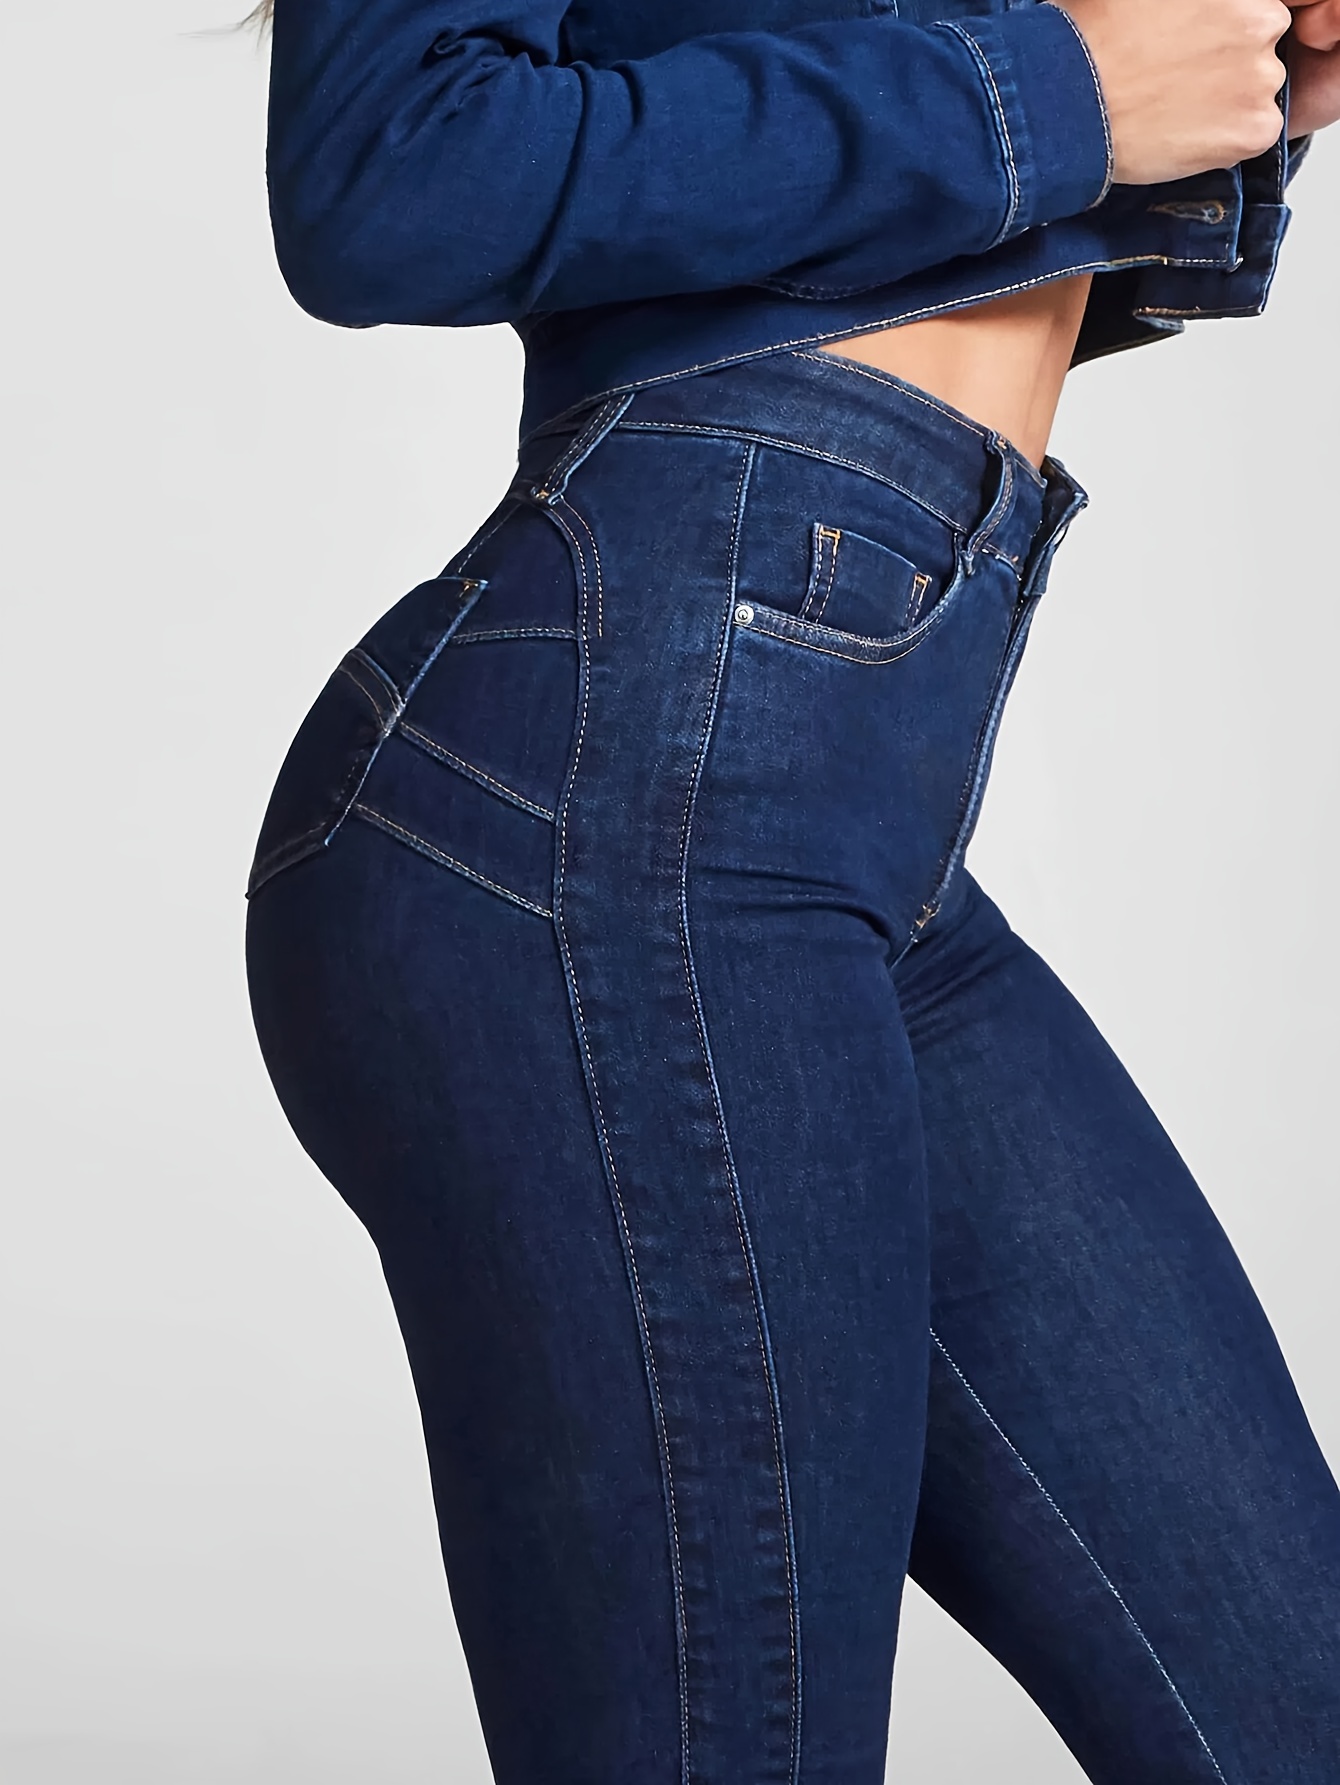 Women's High Waist Stretchy Skinny Leg Jeans, Solid Butt Lifting Denim  Pants, Classic Side * Jeans